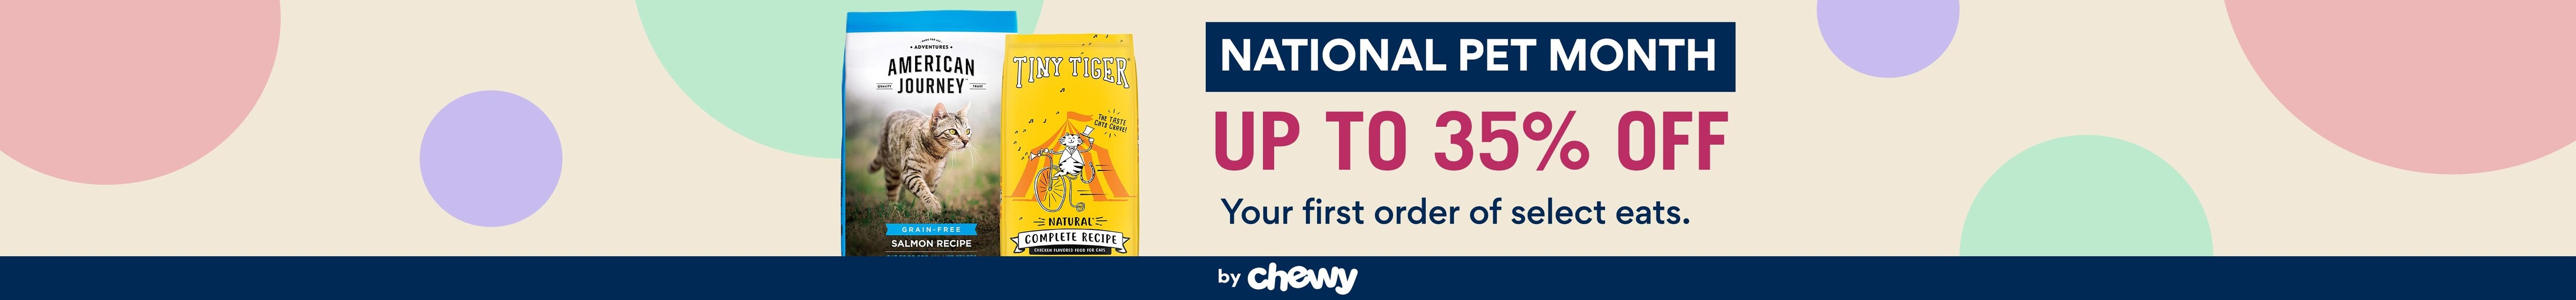 National Pet Month Up Reward your #1 Celebrate with savings on eats from top-rated brands. by Chewy